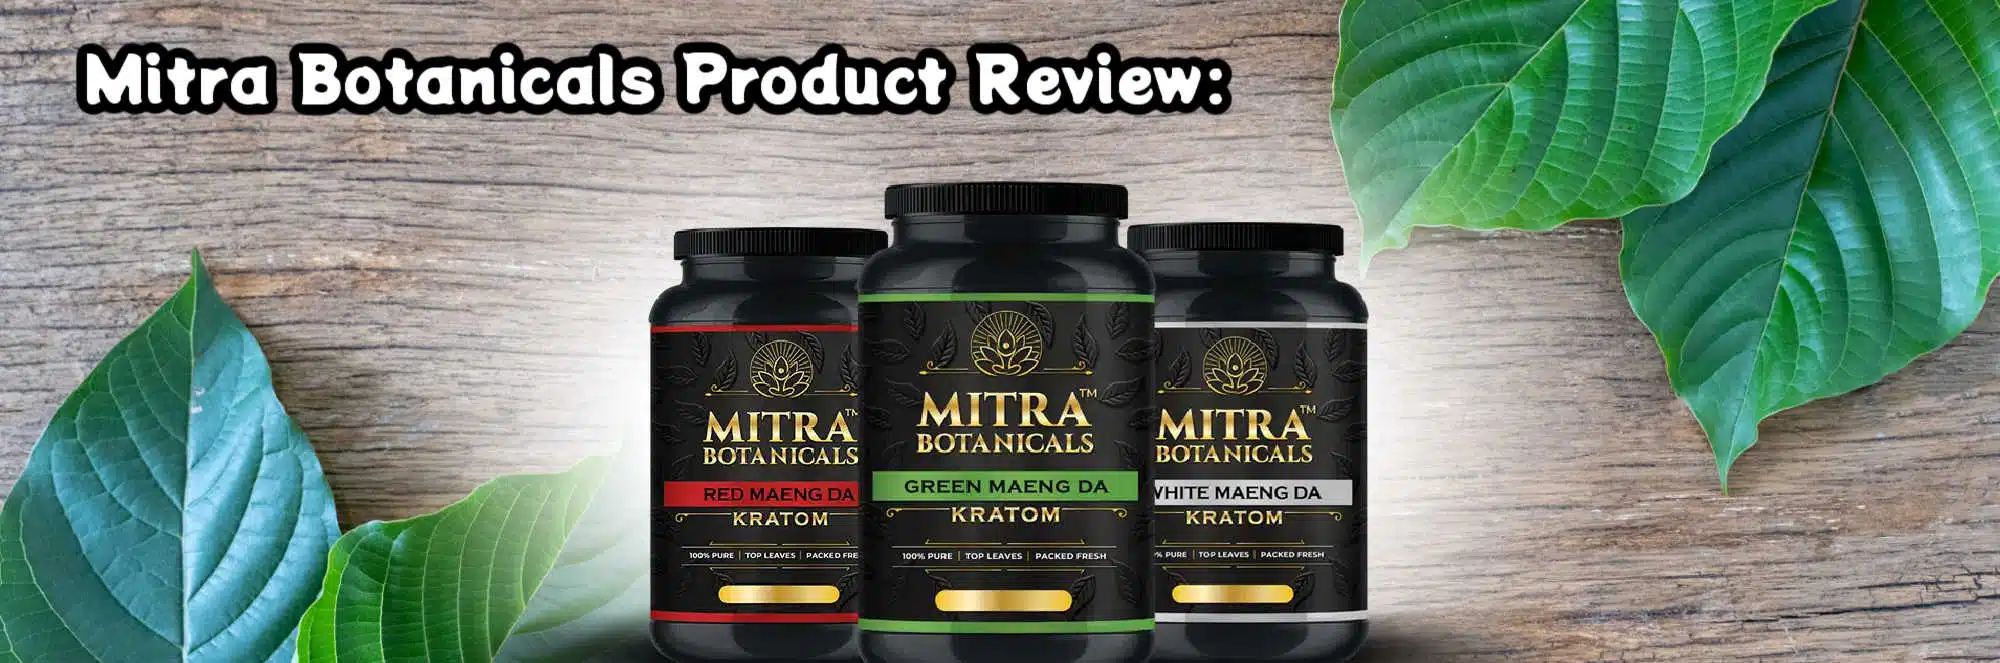 Mitra botanicals product review banner and sample products